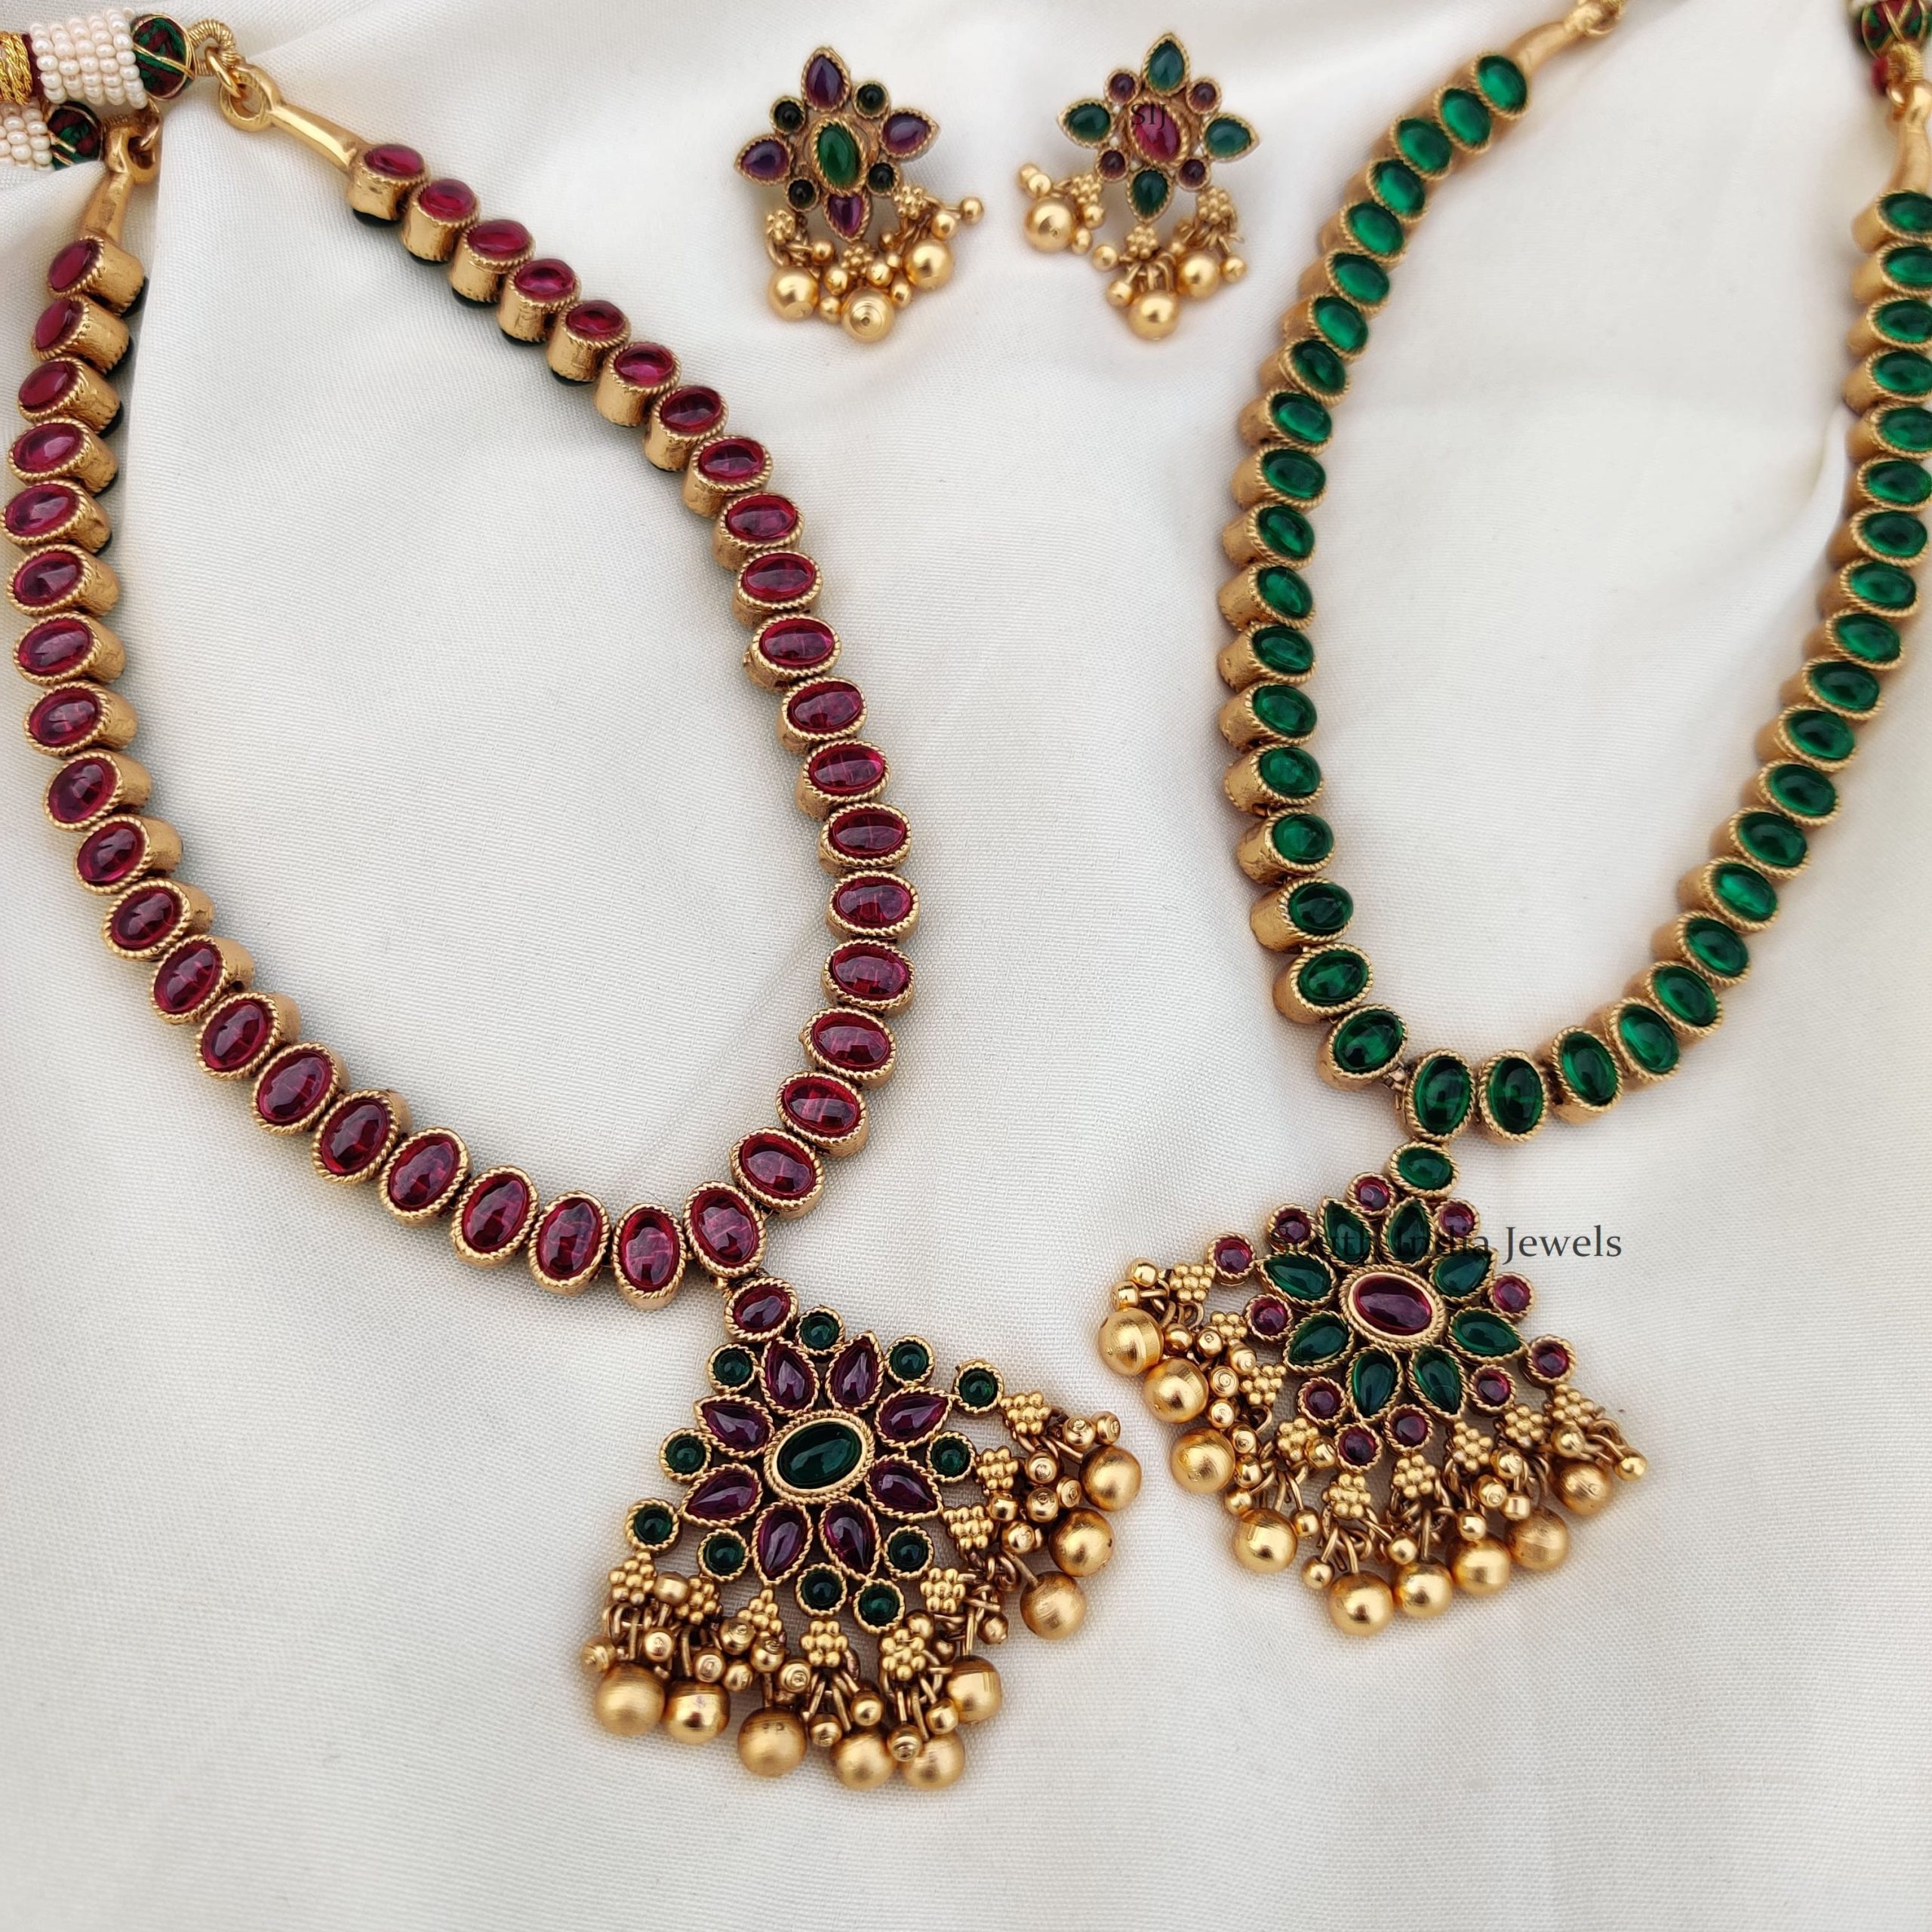 Old Model Attigai Necklace - South India Jewels Online Stores.